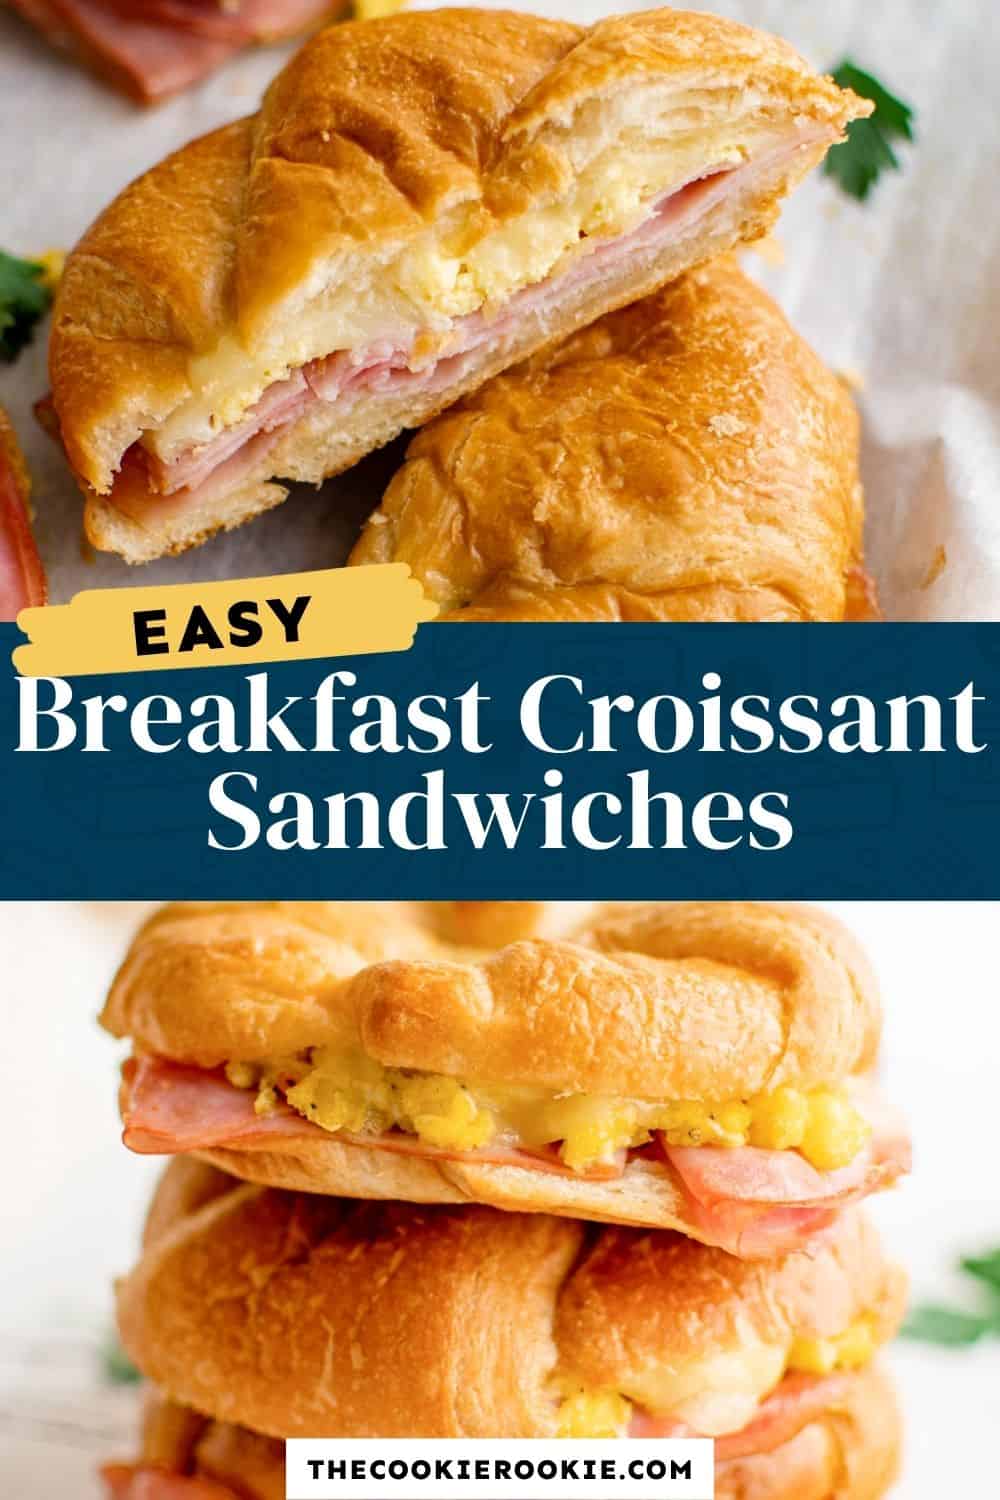 Croissant Breakfast Sandwiches Recipe - The Cookie Rookie®